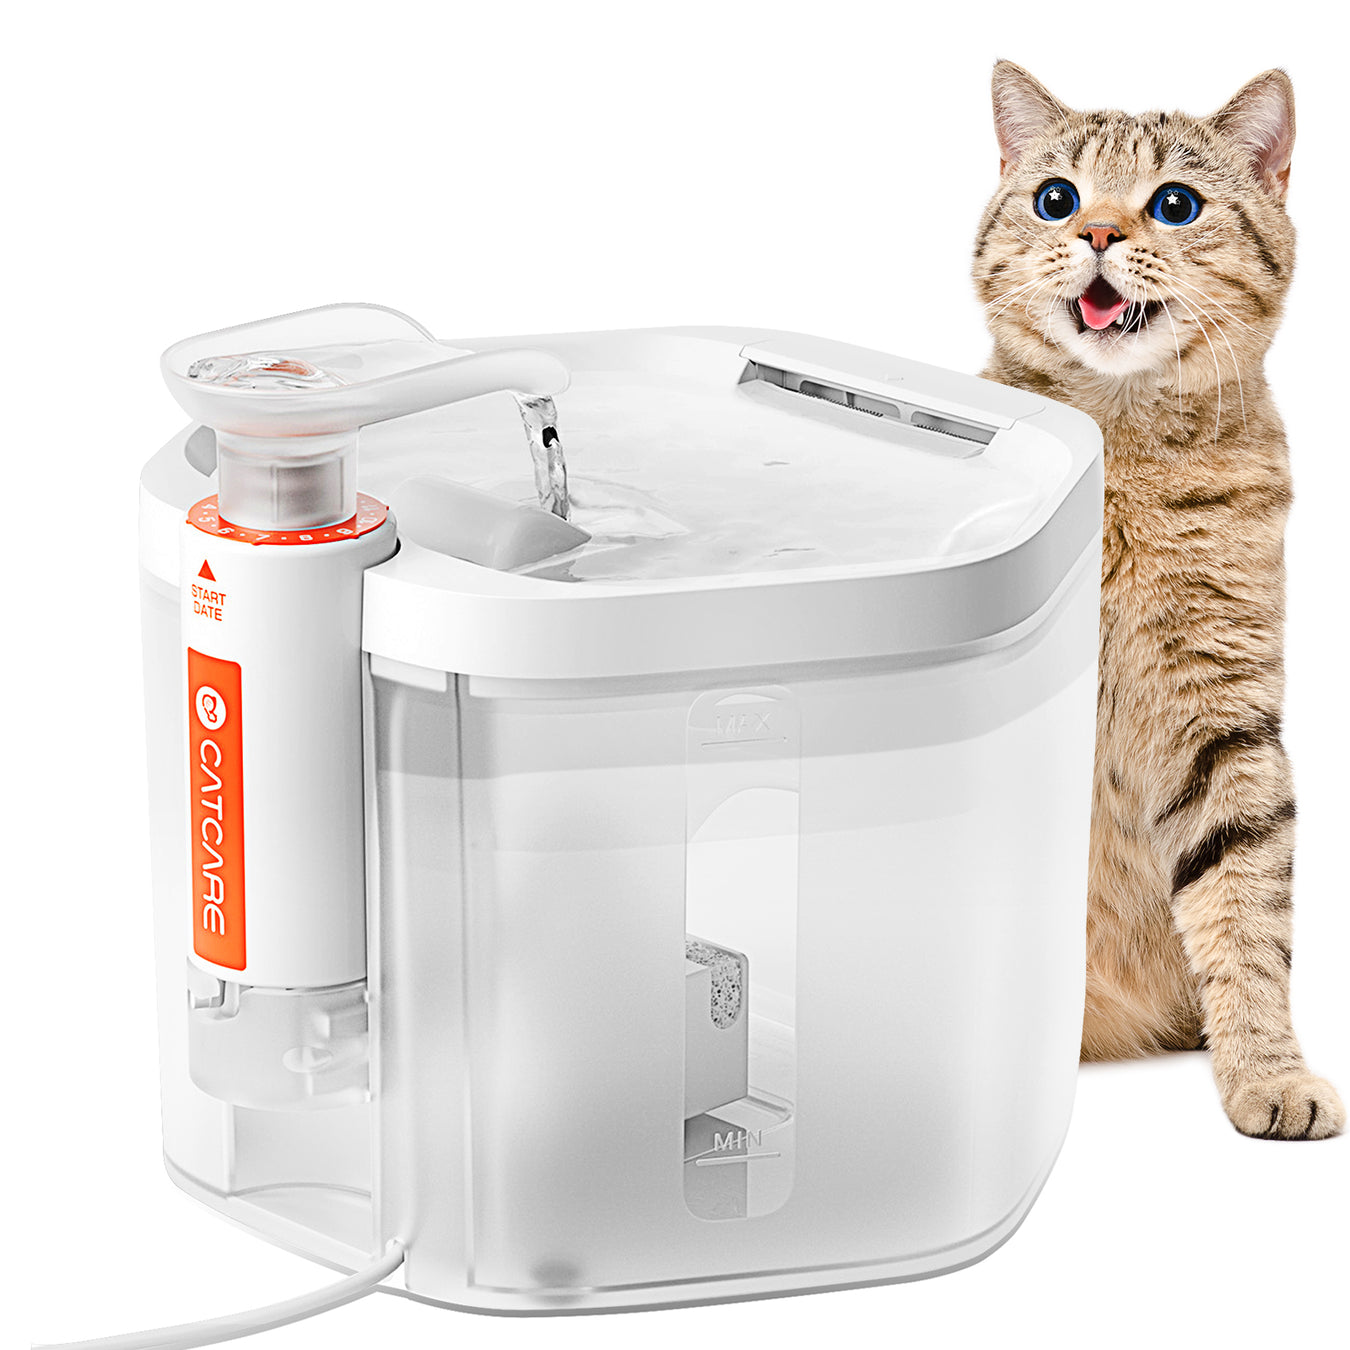 Dog Care cat water